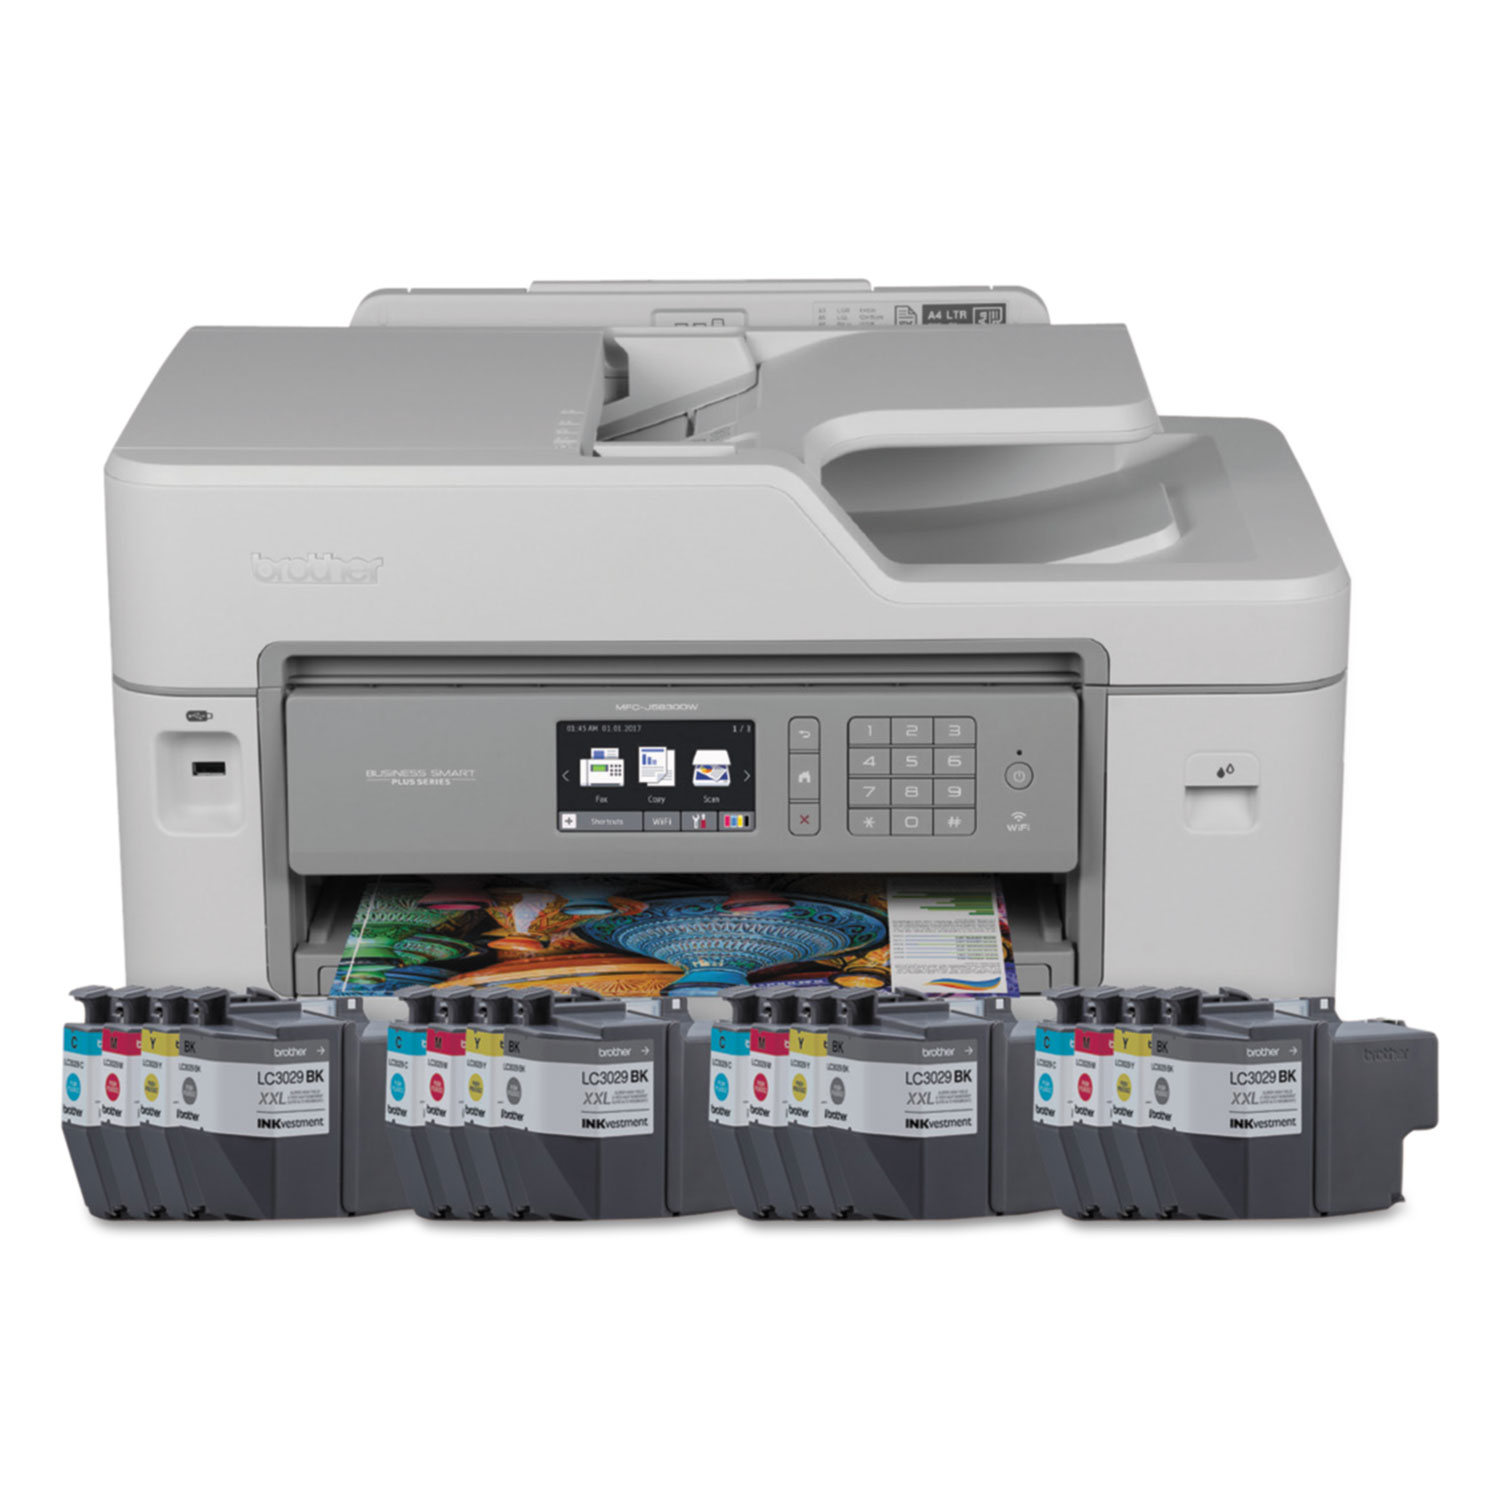 Business Smart Plus MFC-J5830DWXL Color Inkjet All-in-One Printer Series